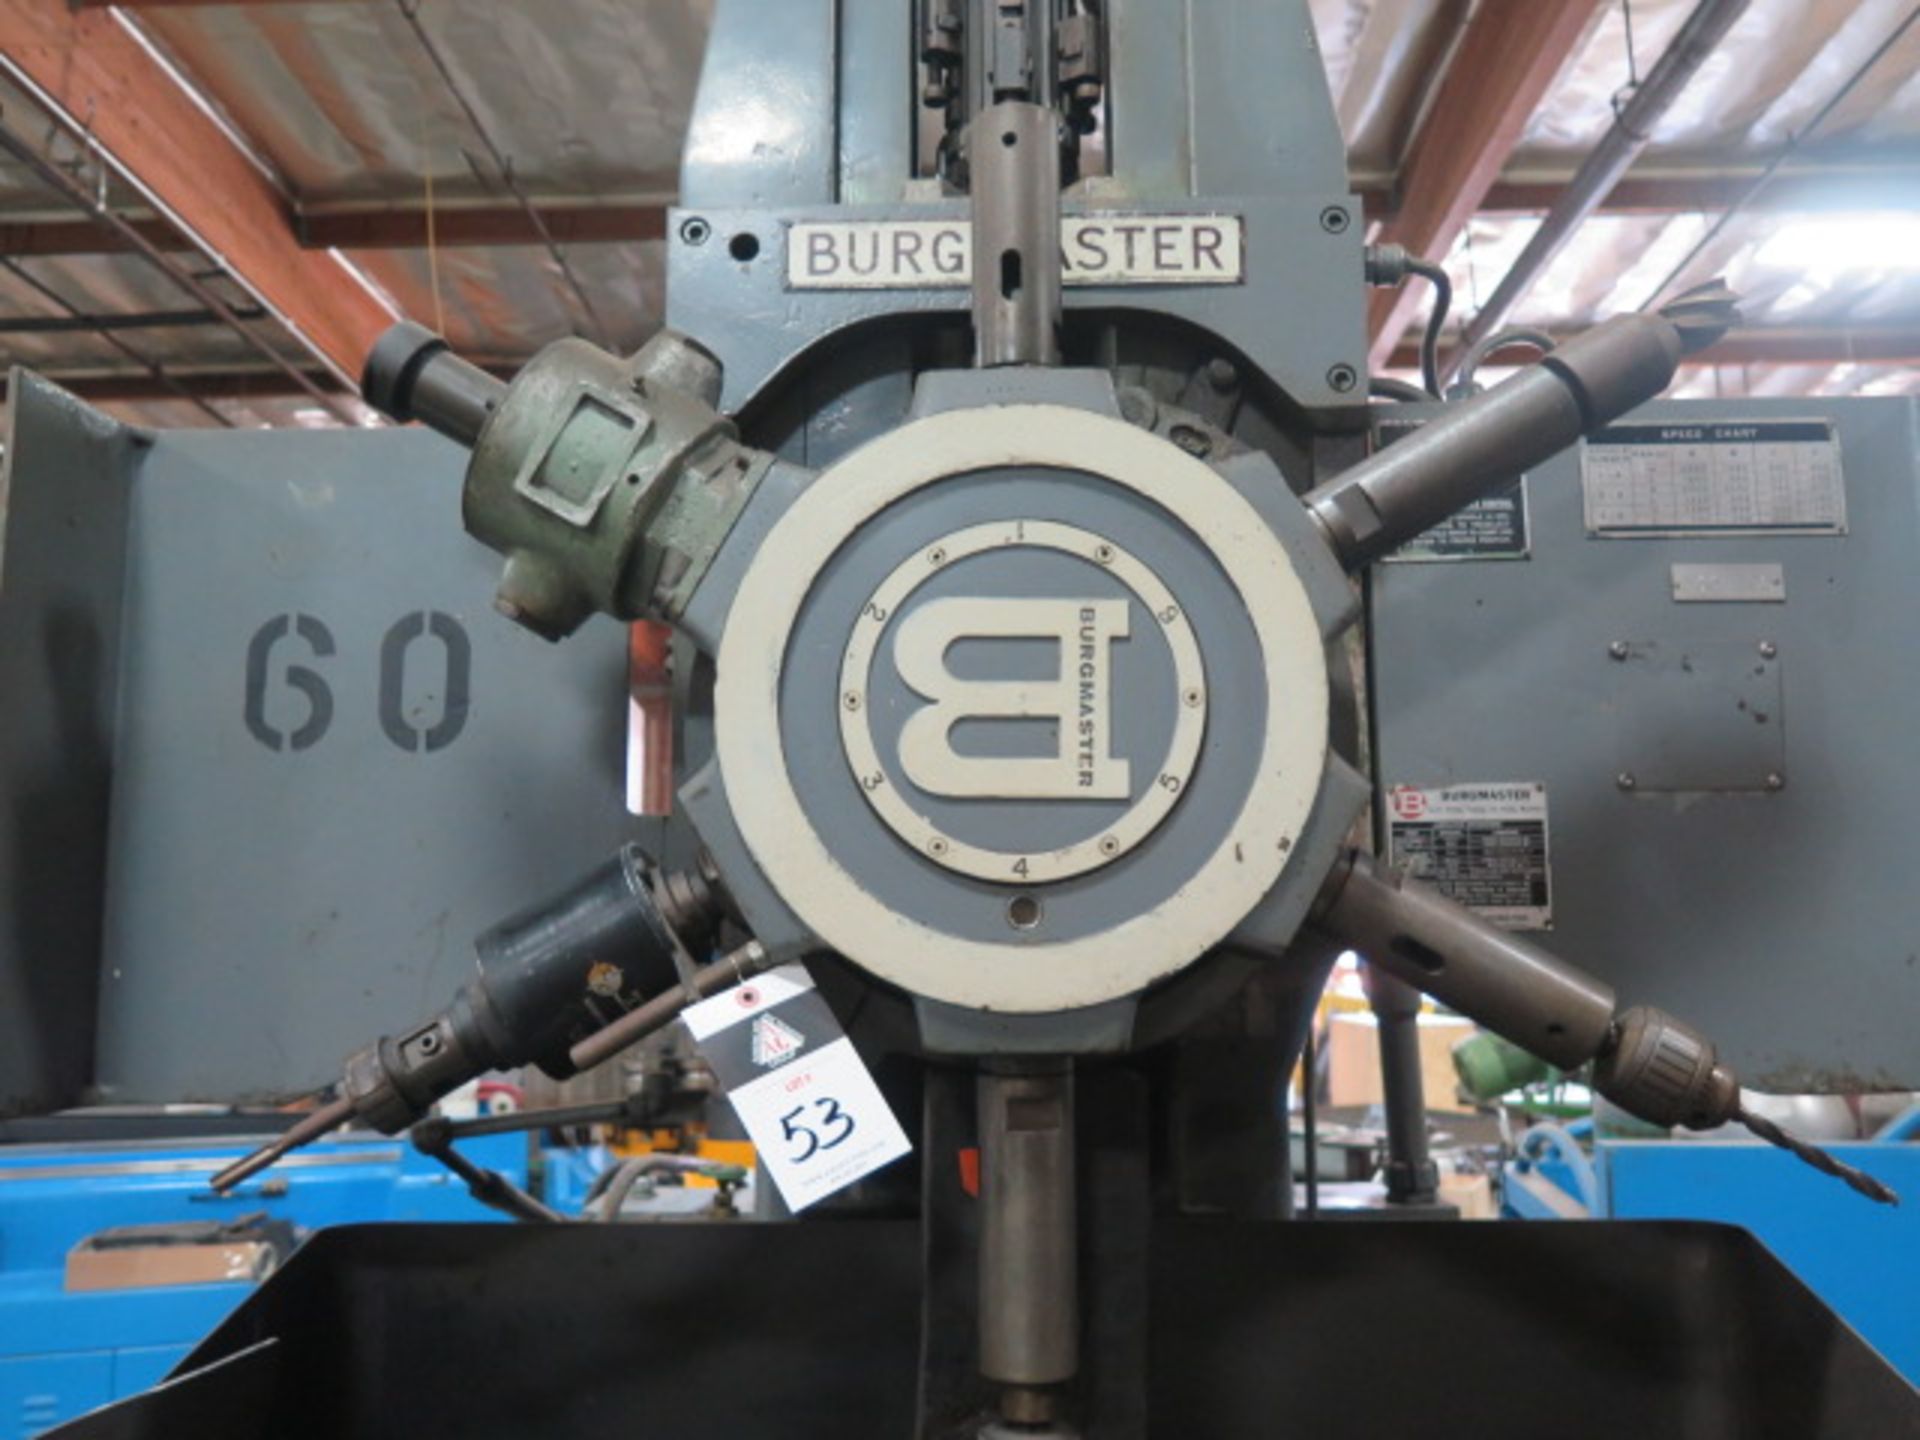 Burgmaster mdl. 25AH 6-Station Power Turret Drill s/n 250177 w/ 100-2900 RPM, SOLD AS IS - Image 4 of 15